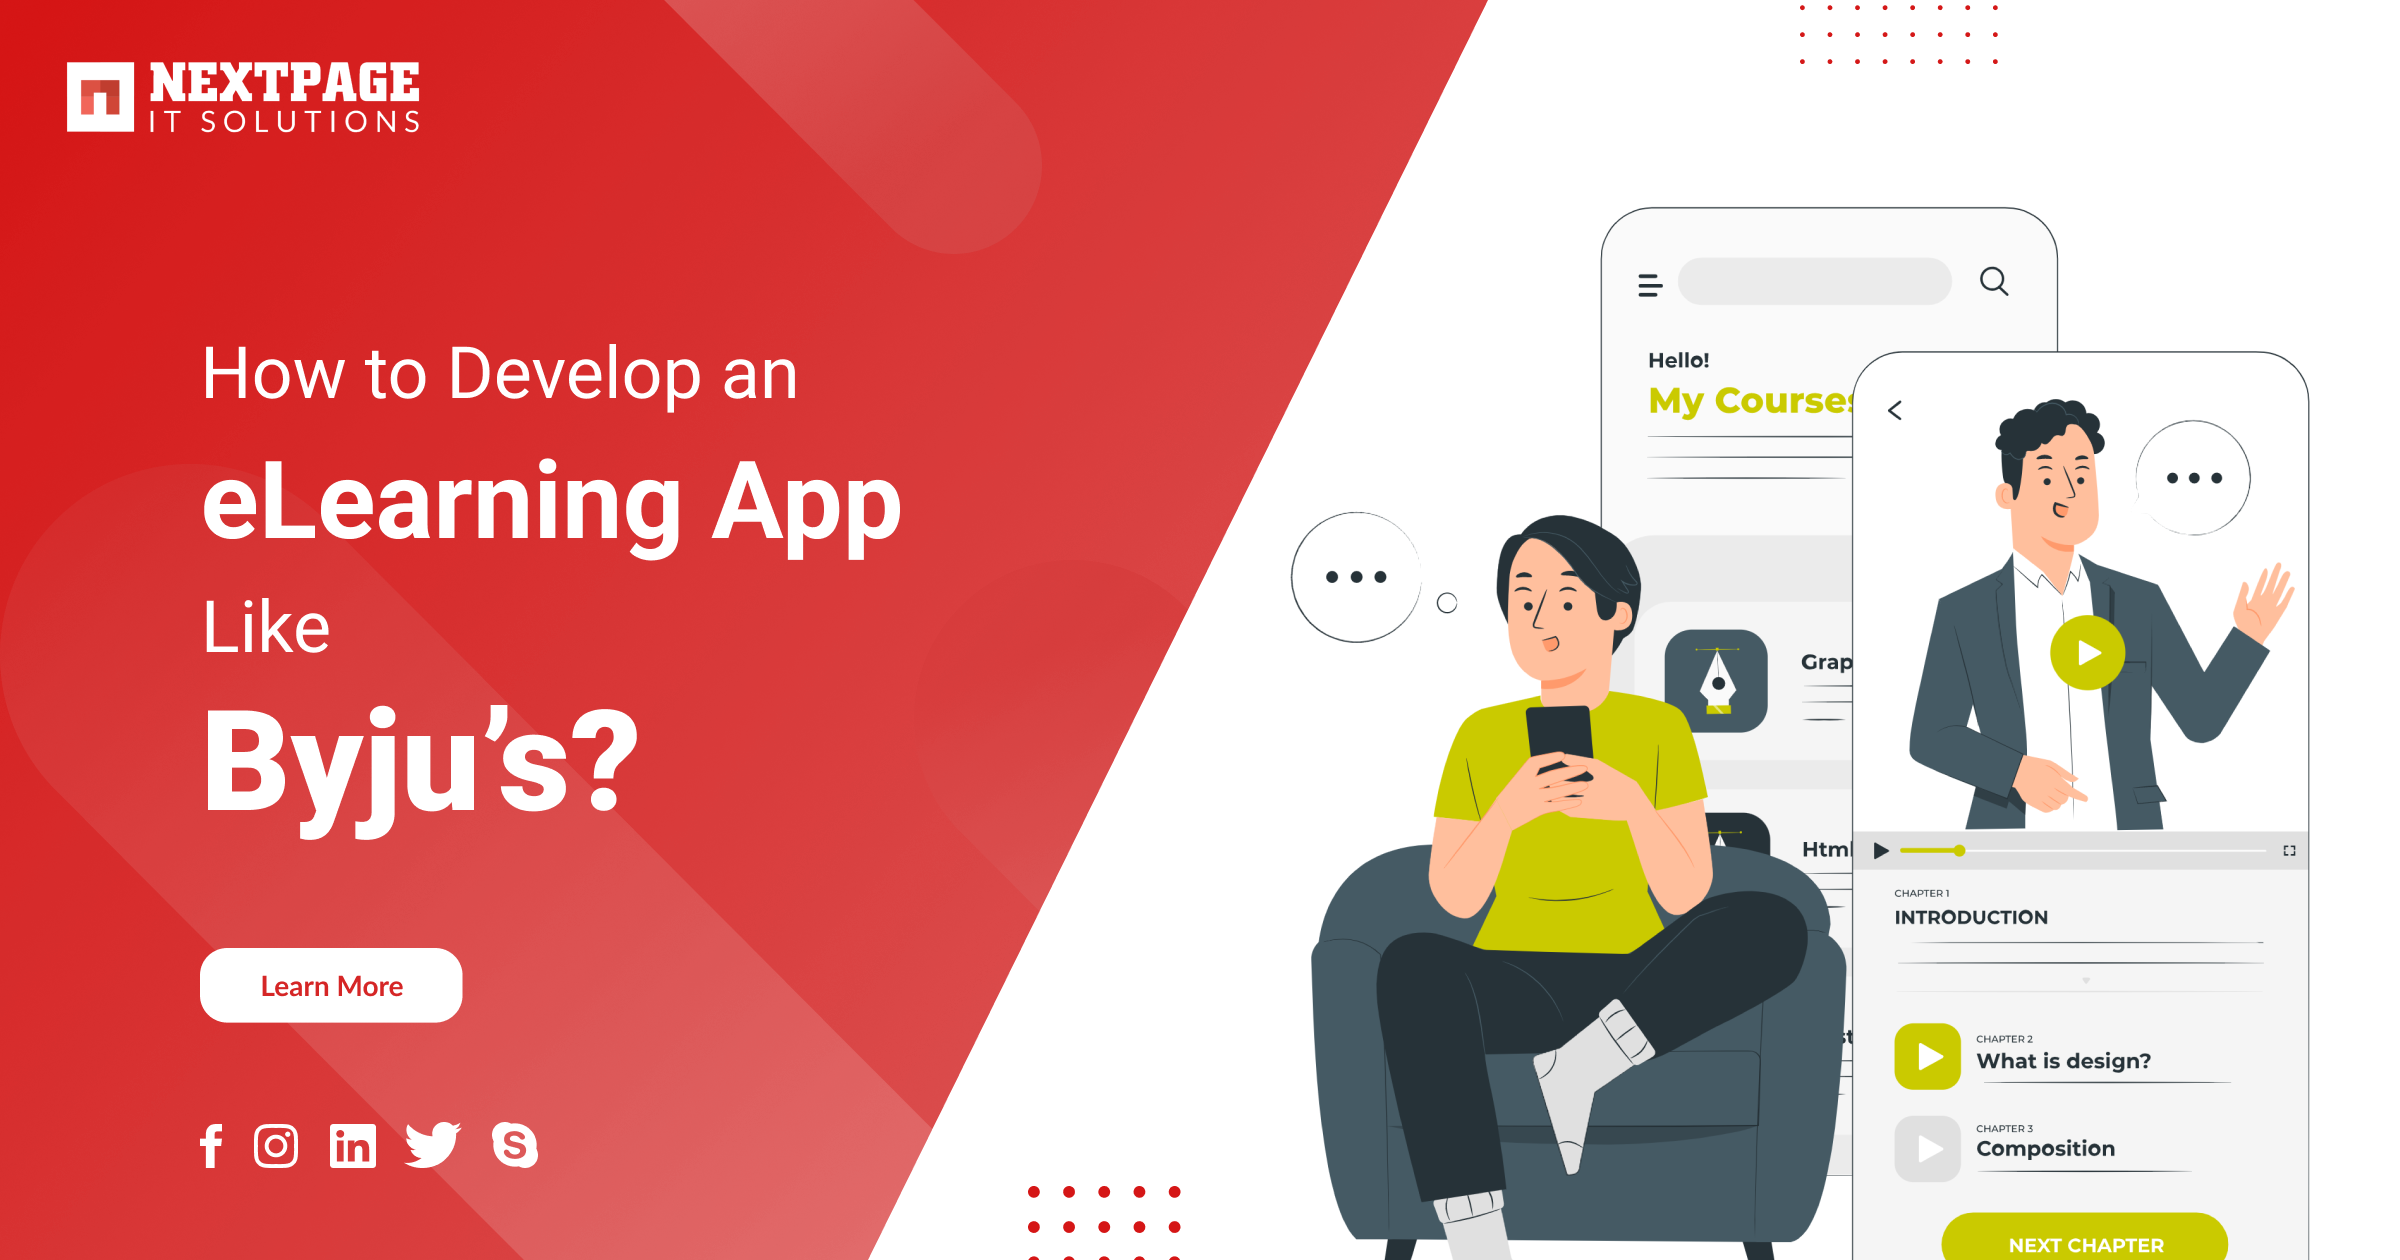 How to Develop an eLearning App Like Byju’s?